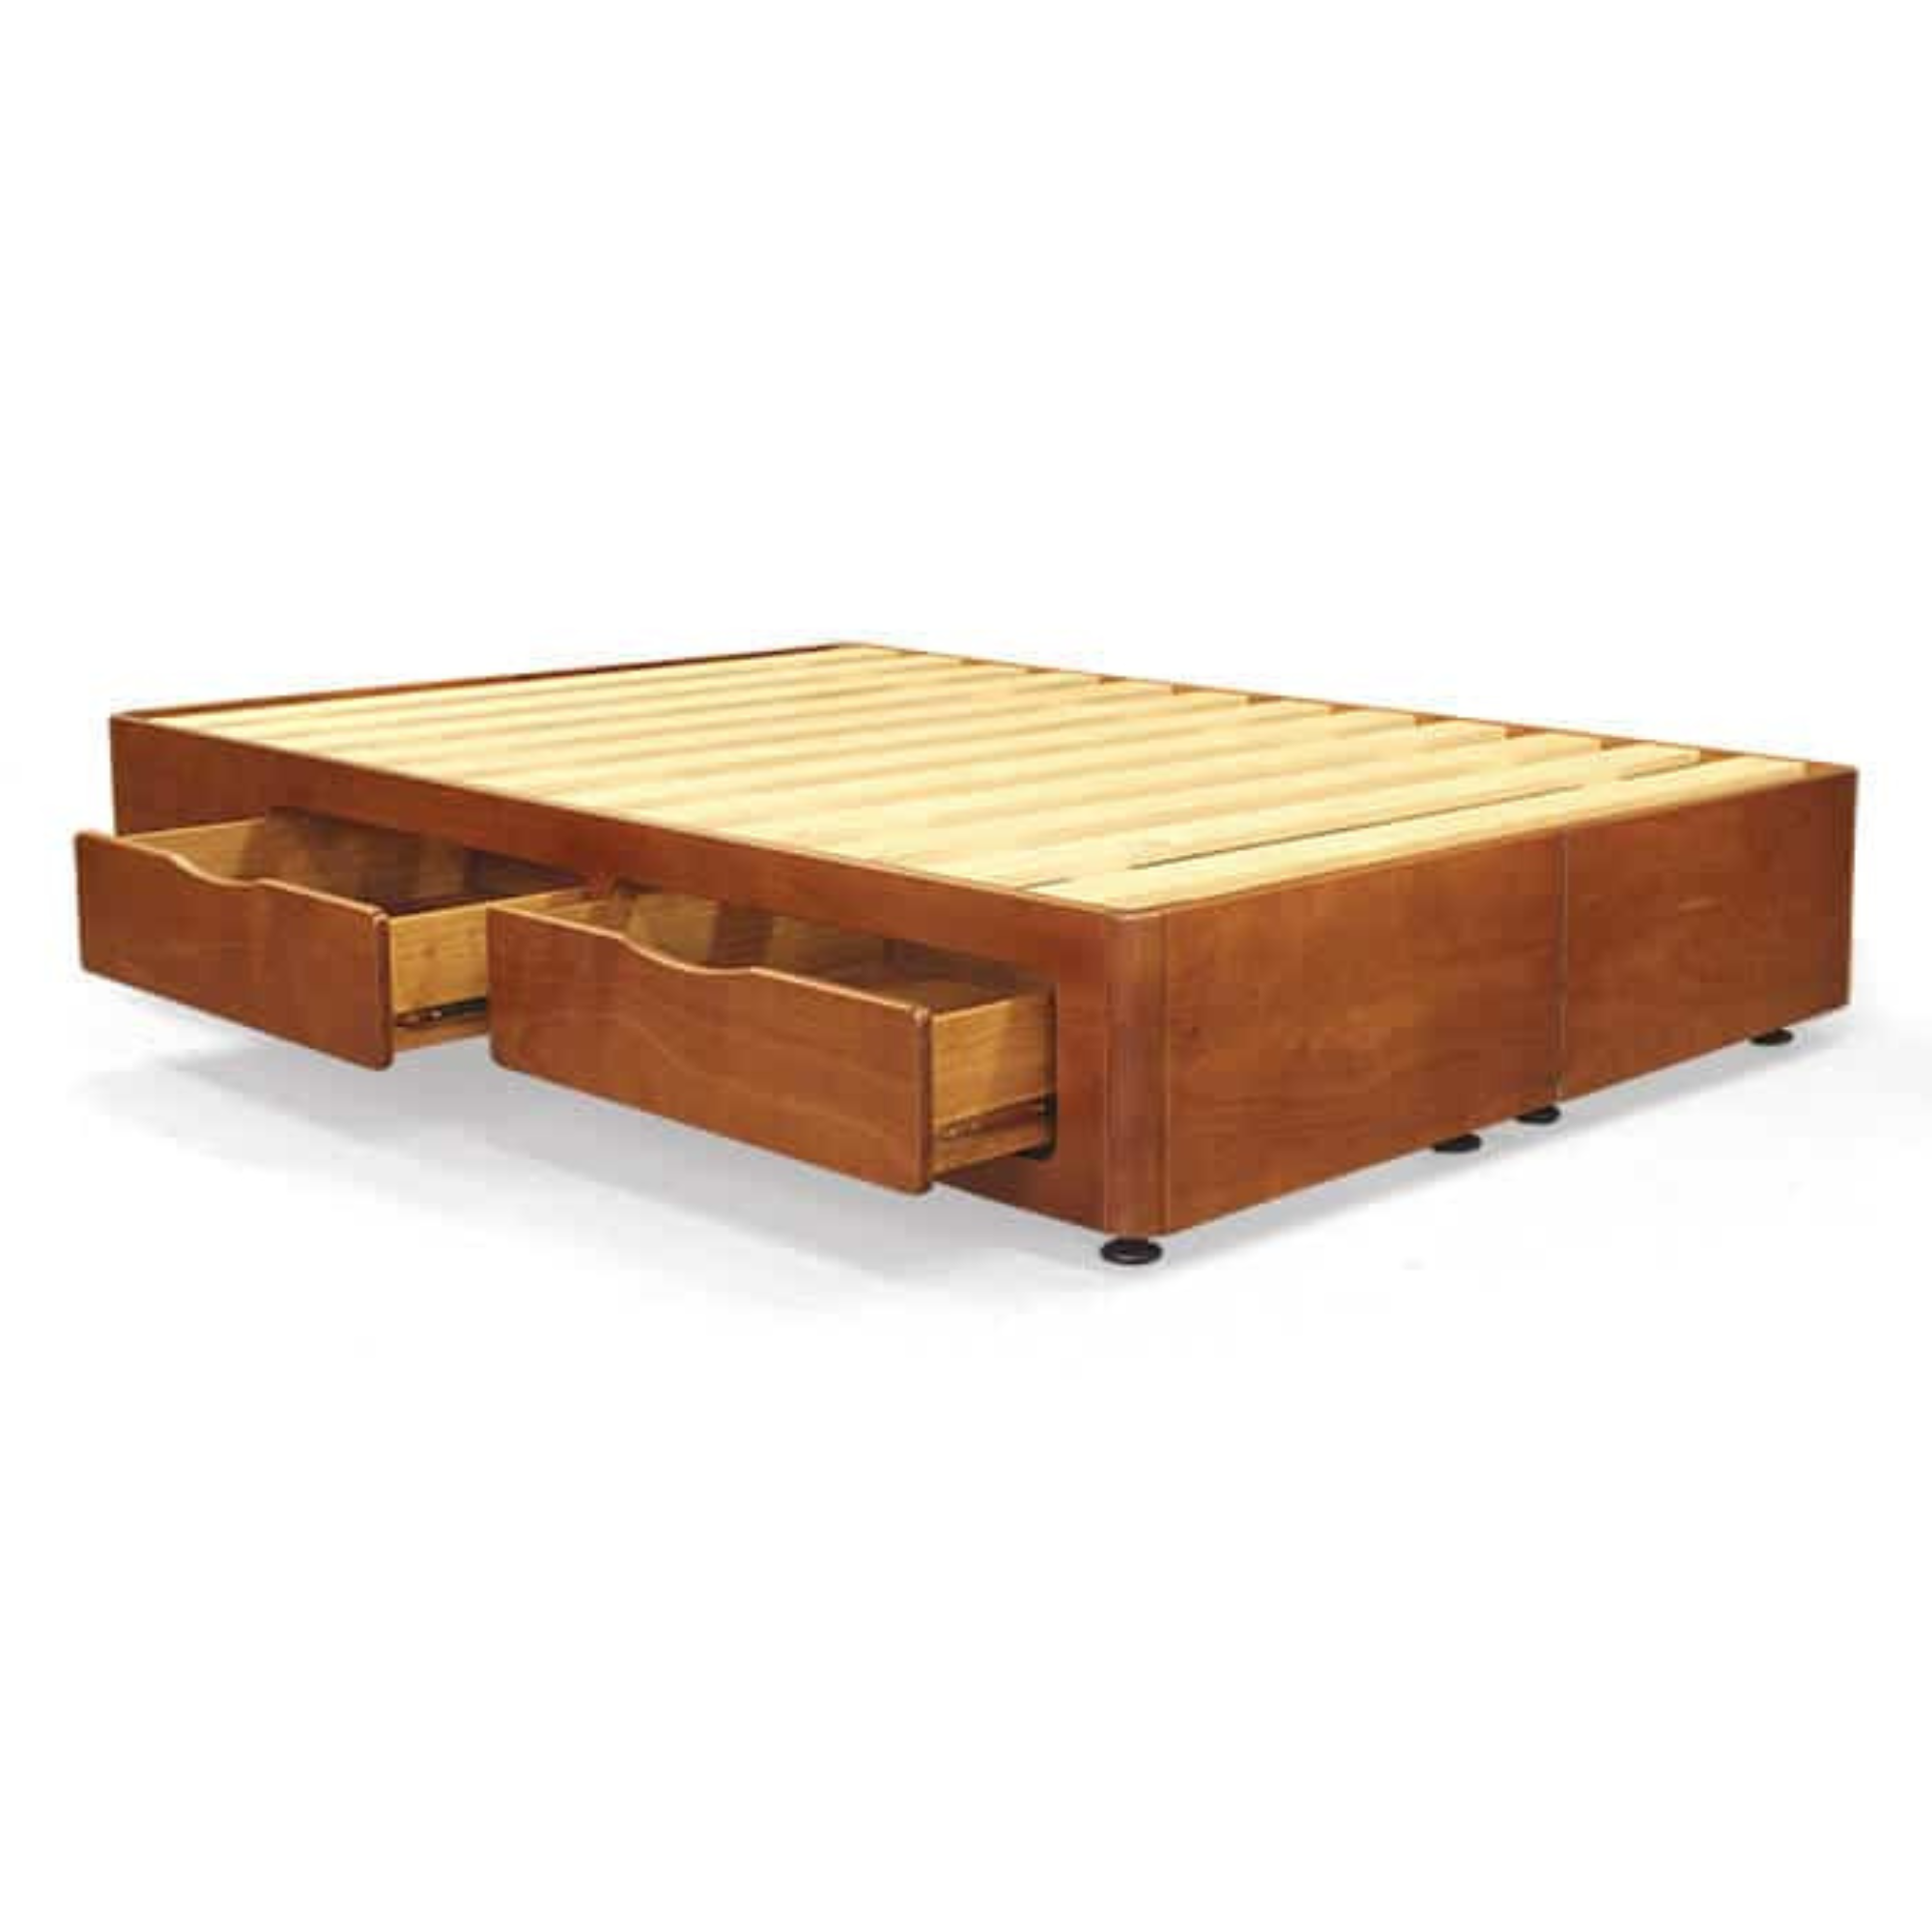 SLEEPNEAT BED BASE | DOUBLE, QUEEN, KING, SUPER KING | WITH OR WITHOUT DRAWERS | NZ MADE